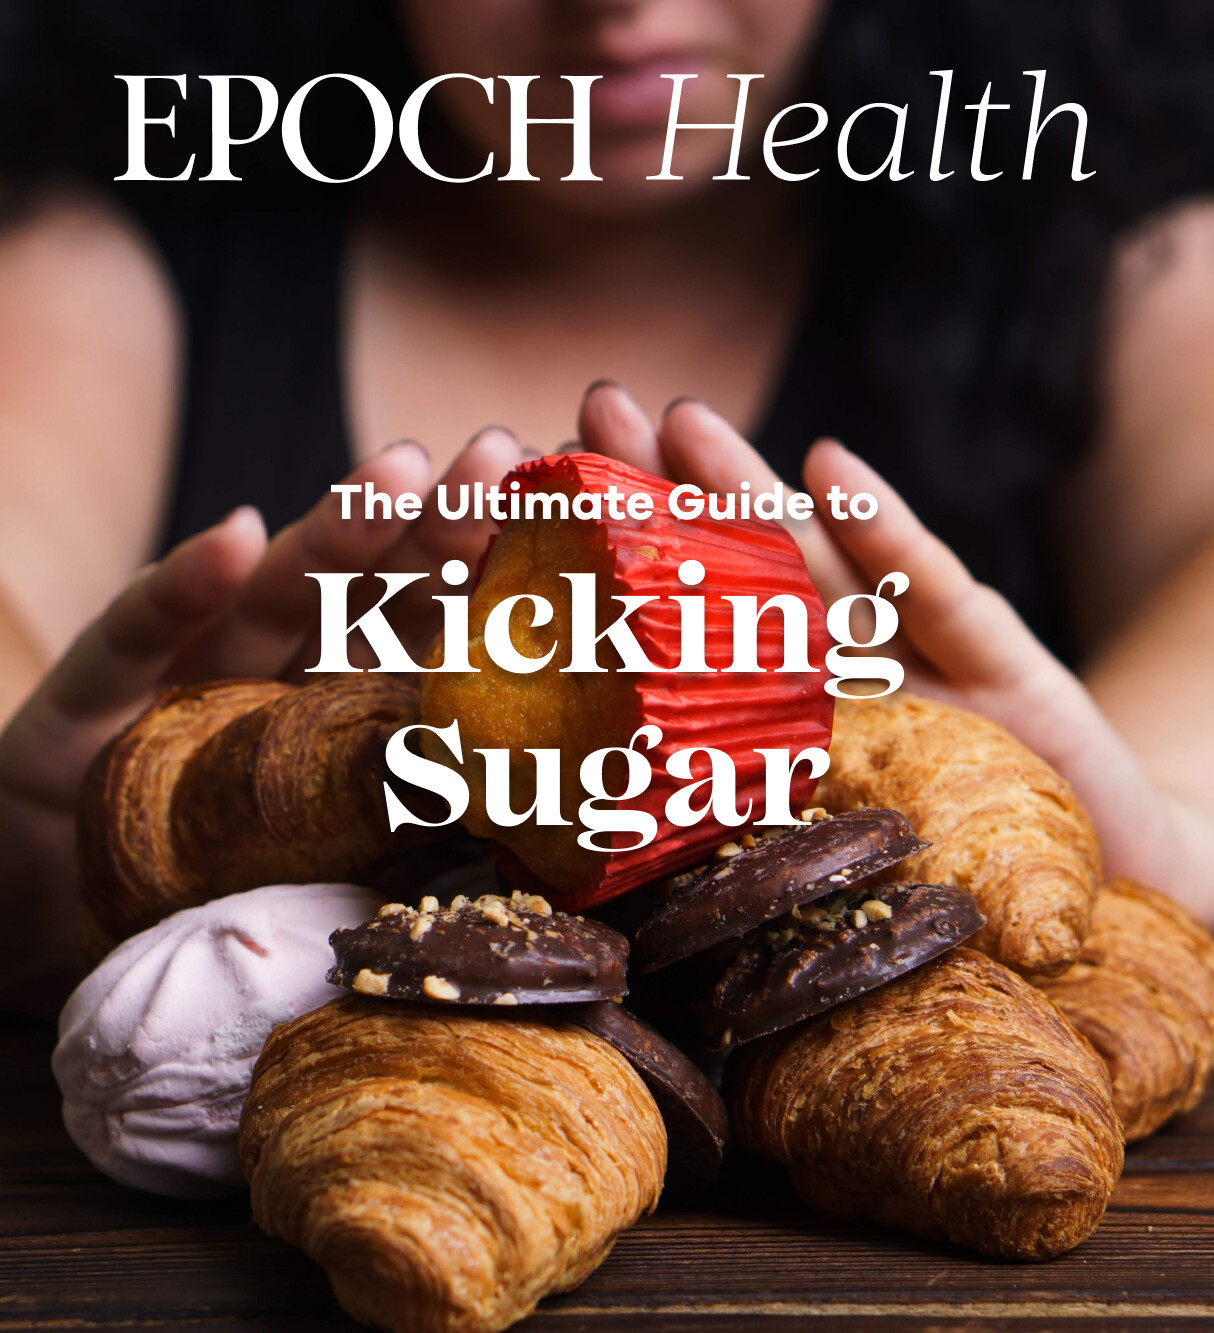 The Ultimate Guide to Kicking Sugar